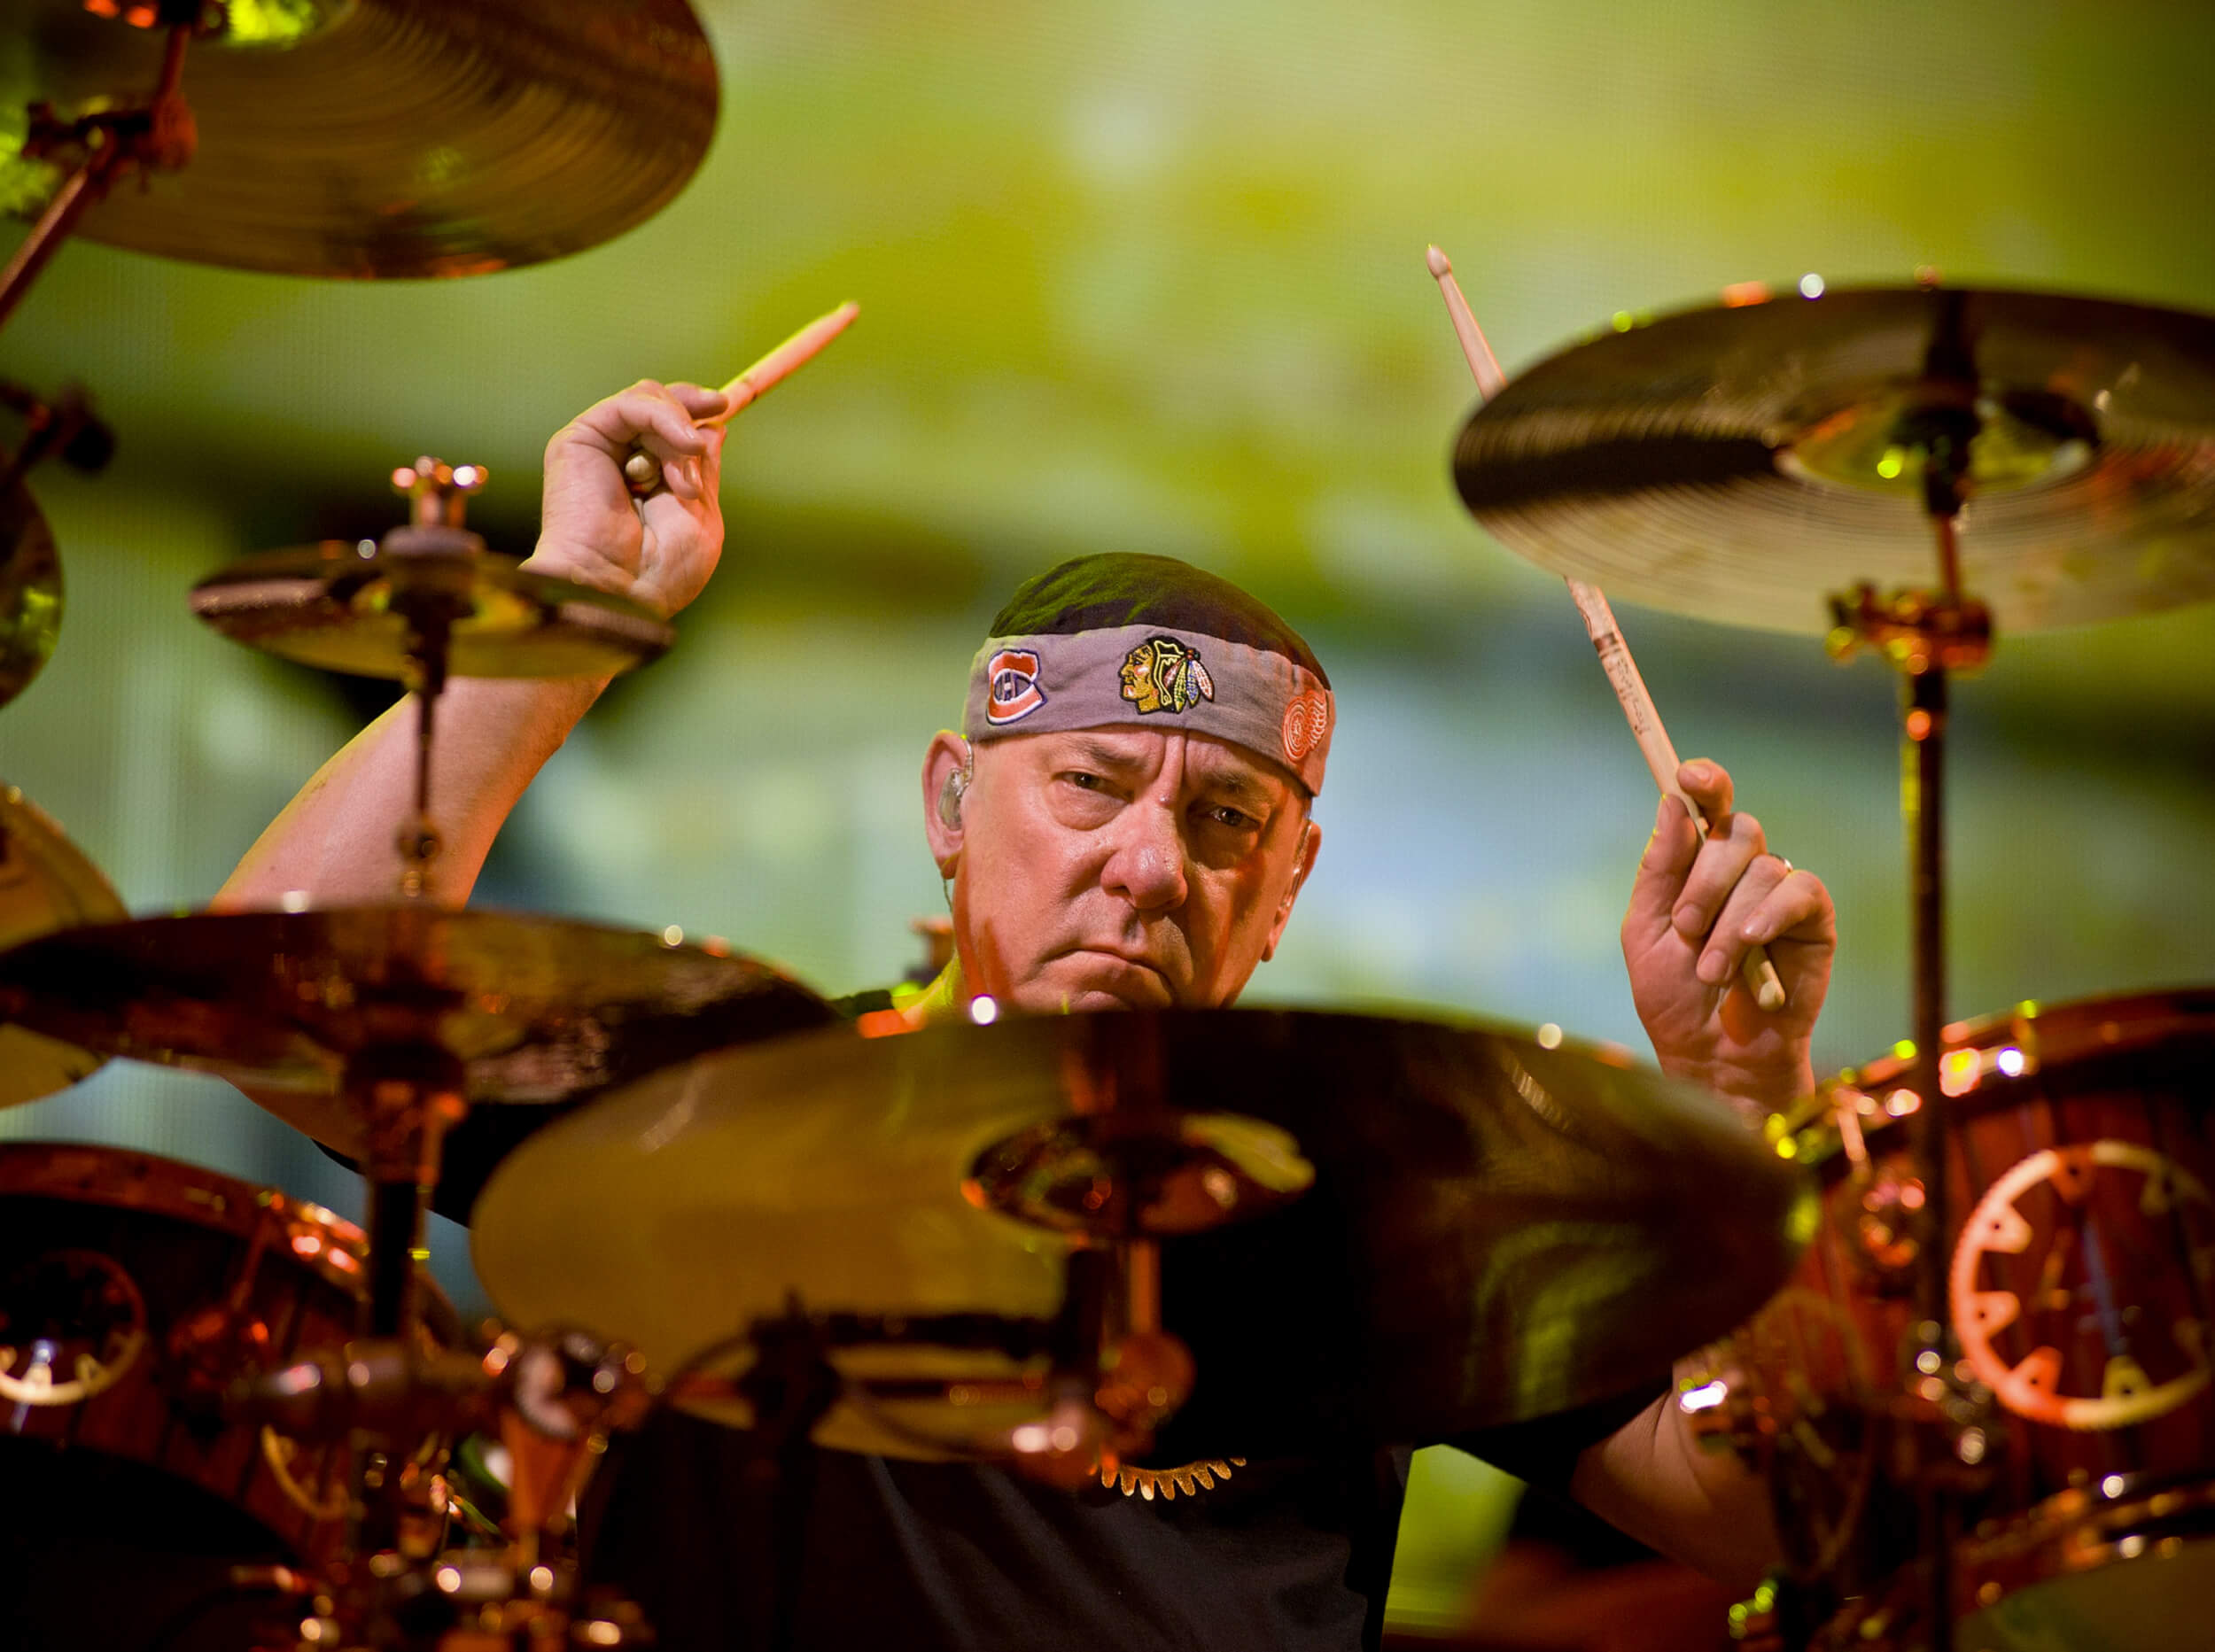 Neil Peart of Rush Dead at 67, Famous Musicians Mourn the Drumming Virtuoso